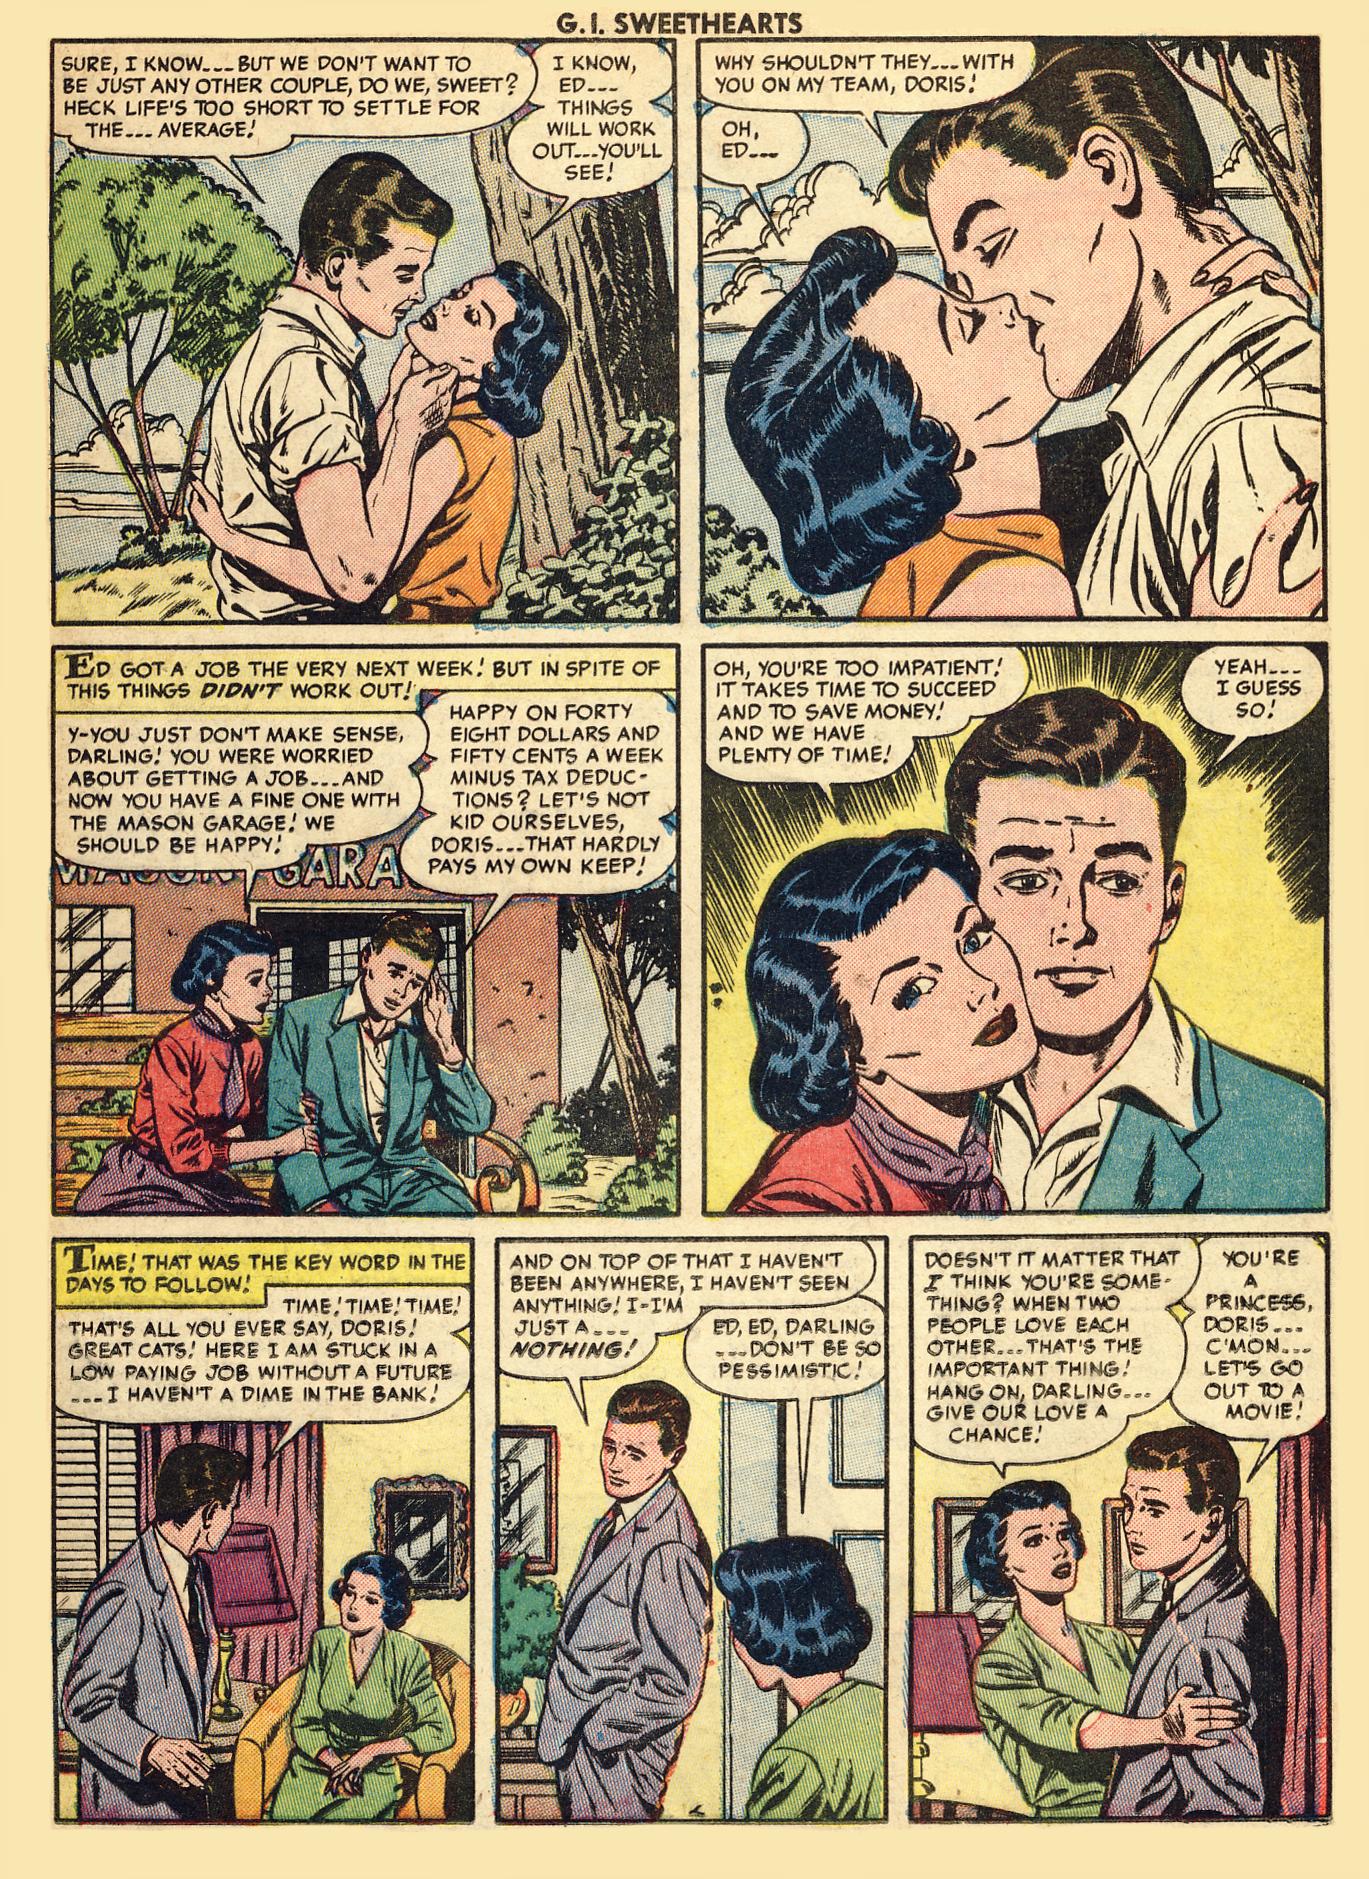 Read online G.I. Sweethearts comic -  Issue #41 - 13